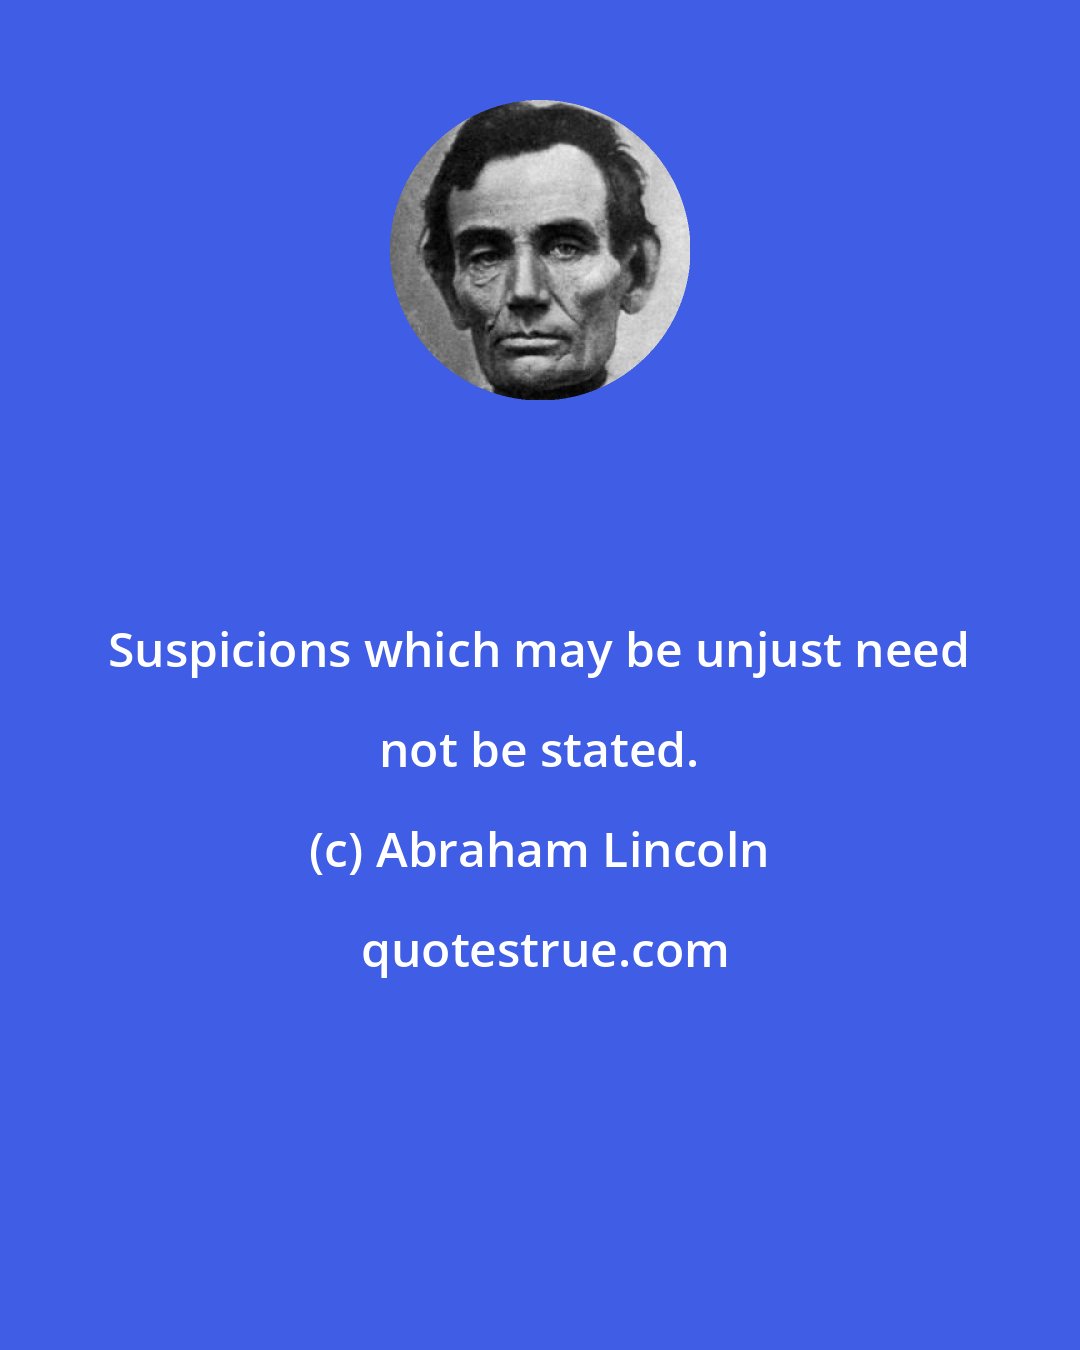 Abraham Lincoln: Suspicions which may be unjust need not be stated.